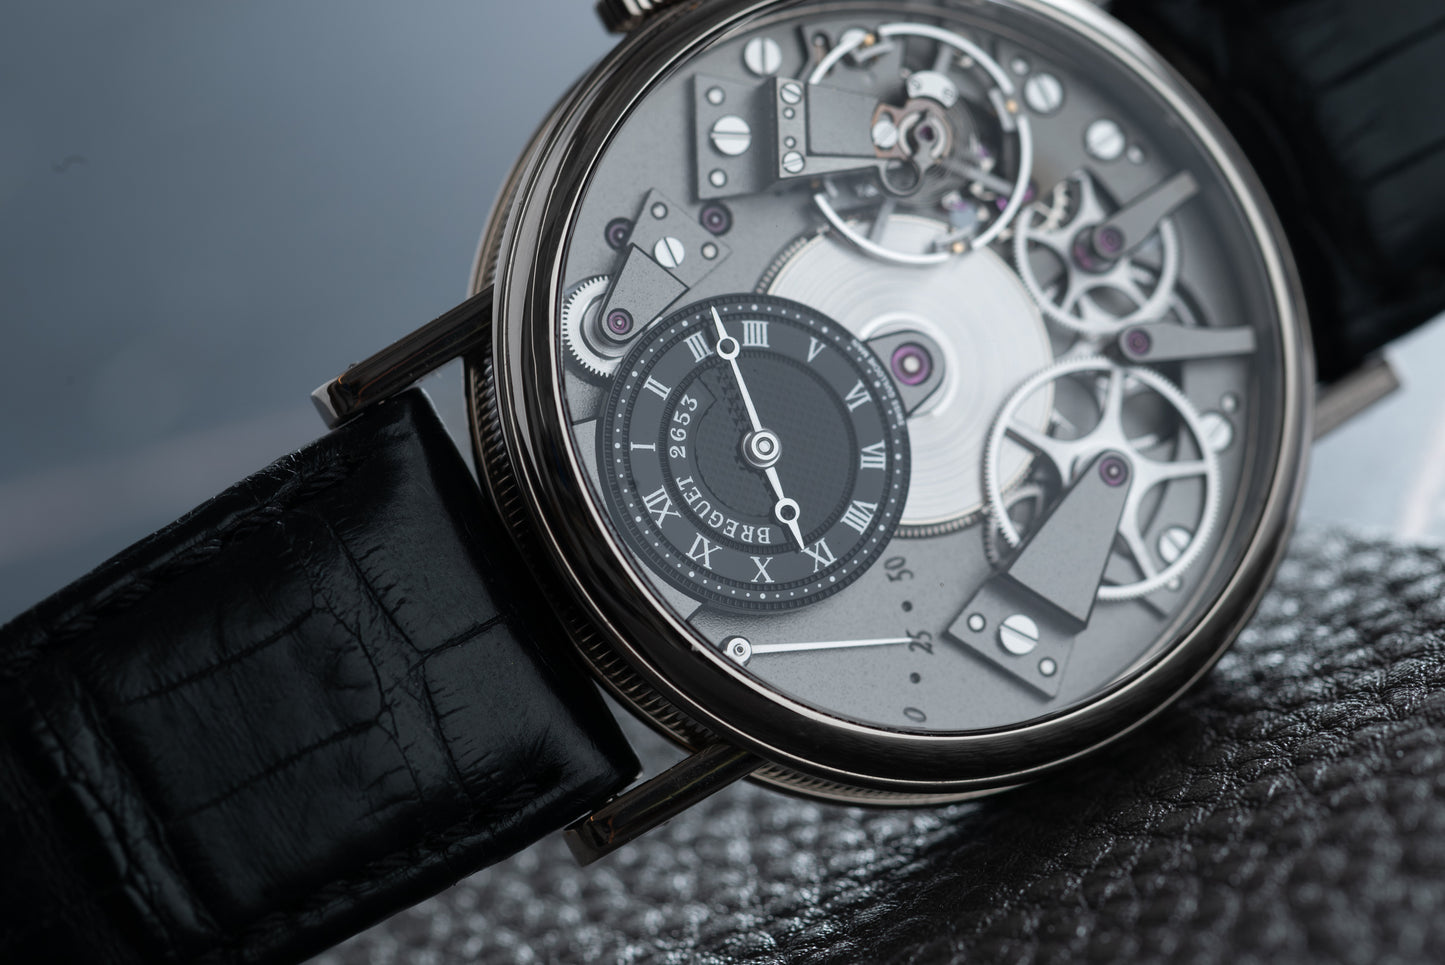 Breguet Tradition White Gold